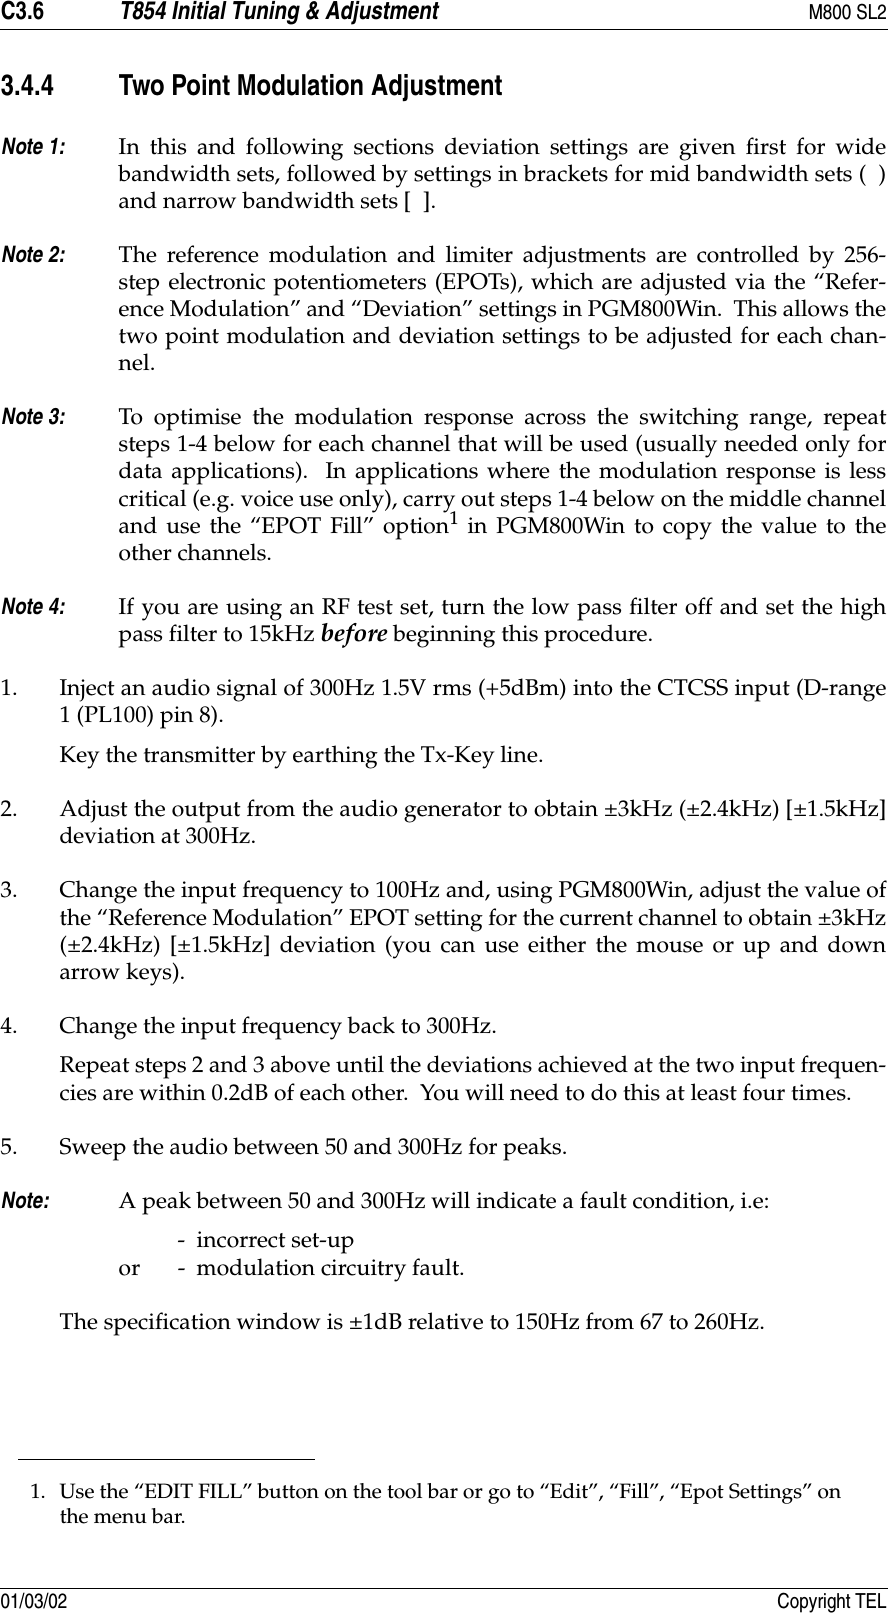 C3.6 T854 Initial Tuning &amp; Adjustment M800 SL201/03/02 Copyright TEL3.4.4 Two Point Modulation AdjustmentNote 1: In this and following sections deviation settings are given first for widebandwidth sets, followed by settings in brackets for mid bandwidth sets (  )and narrow bandwidth sets [  ].Note 2: The reference modulation and limiter adjustments are controlled by 256-step electronic potentiometers (EPOTs), which are adjusted via the “Refer-ence Modulation” and “Deviation” settings in PGM800Win.  This allows thetwo point modulation and deviation settings to be adjusted for each chan-nel.Note 3: To optimise the modulation response across the switching range, repeatsteps 1-4 below for each channel that will be used (usually needed only fordata applications).  In applications where the modulation response is lesscritical (e.g. voice use only), carry out steps 1-4 below on the middle channeland use the “EPOT Fill” option1 in PGM800Win to copy the value to theother channels.Note 4: If you are using an RF test set, turn the low pass filter off and set the highpass filter to 15kHz before beginning this procedure.1. Inject an audio signal of 300Hz 1.5V rms (+5dBm) into the CTCSS input (D-range1 (PL100) pin 8). Key the transmitter by earthing the Tx-Key line.2. Adjust the output from the audio generator to obtain ±3kHz (±2.4kHz) [±1.5kHz]deviation at 300Hz.3. Change the input frequency to 100Hz and, using PGM800Win, adjust the value ofthe “Reference Modulation” EPOT setting for the current channel to obtain ±3kHz(±2.4kHz) [±1.5kHz] deviation (you can use either the mouse or up and downarrow keys).4. Change the input frequency back to 300Hz.Repeat steps 2 and 3 above until the deviations achieved at the two input frequen-cies are within 0.2dB of each other.  You will need to do this at least four times.5. Sweep the audio between 50 and 300Hz for peaks.Note: A peak between 50 and 300Hz will indicate a fault condition, i.e:-  incorrect set-up or -  modulation circuitry fault. The specification window is ±1dB relative to 150Hz from 67 to 260Hz.1. Use the “EDIT FILL” button on the tool bar or go to “Edit”, “Fill”, “Epot Settings” on the menu bar.